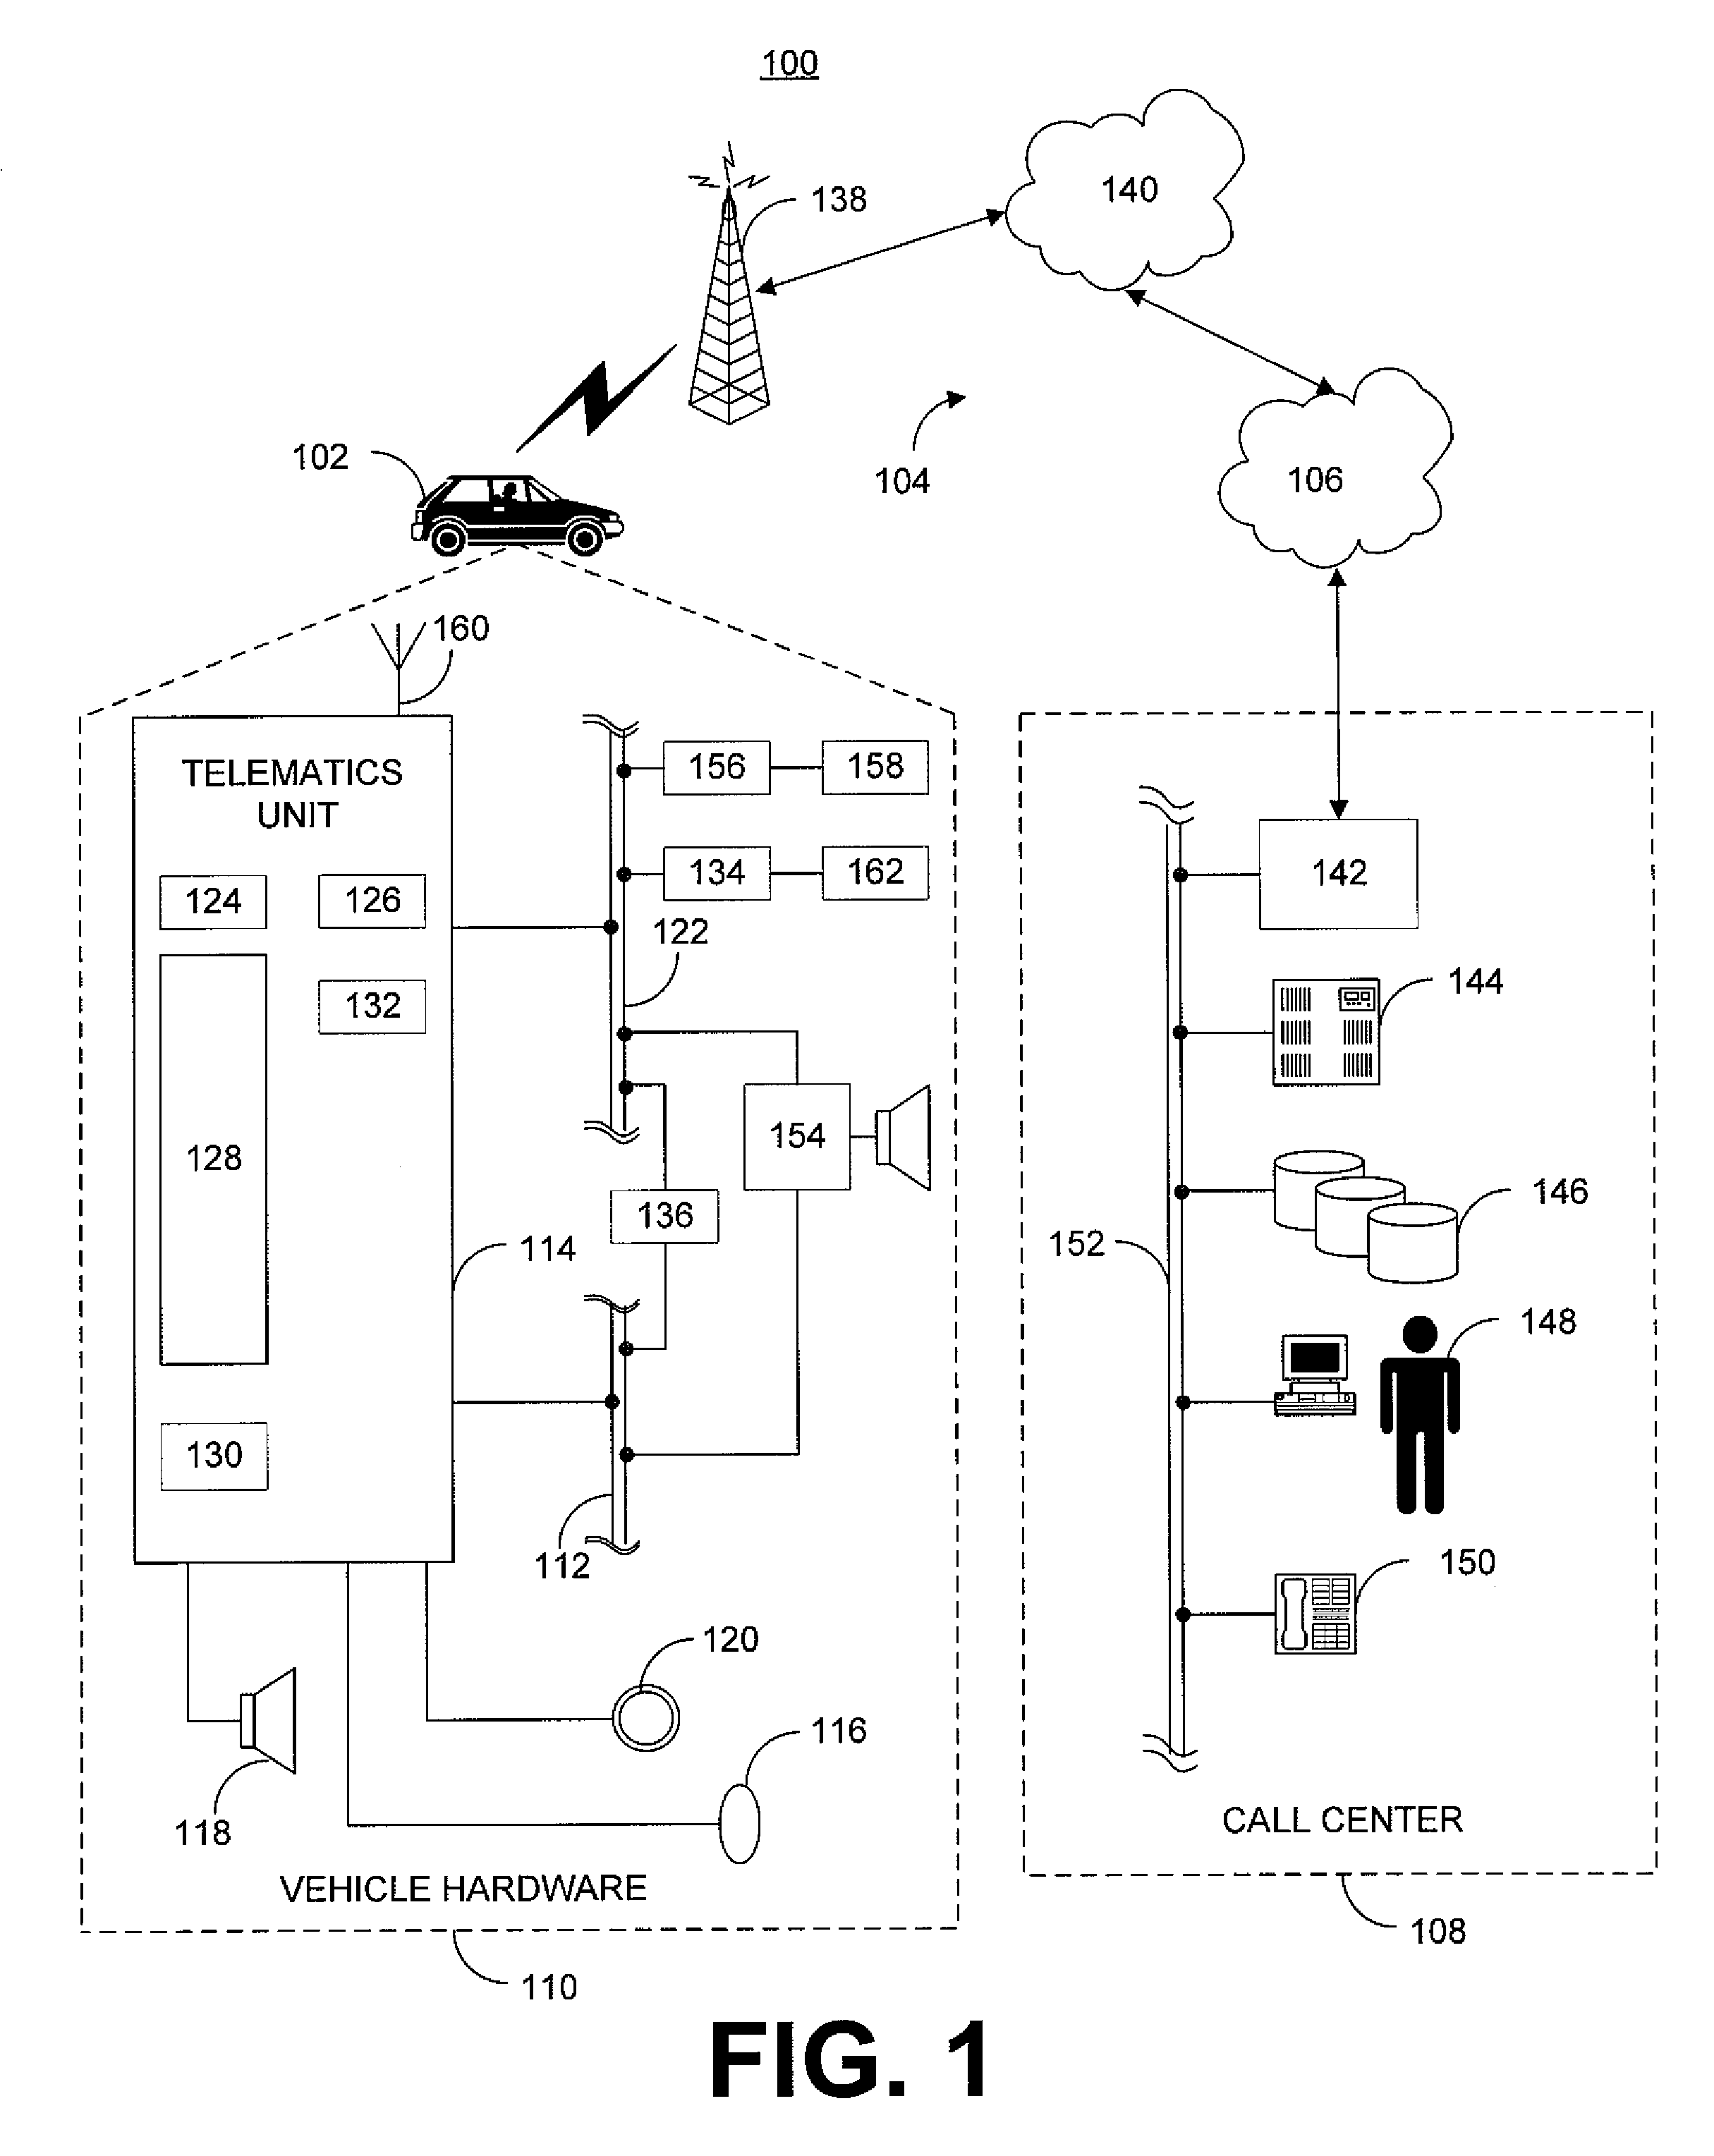 Remote trigger of an alternate energy source to power a vehicle system